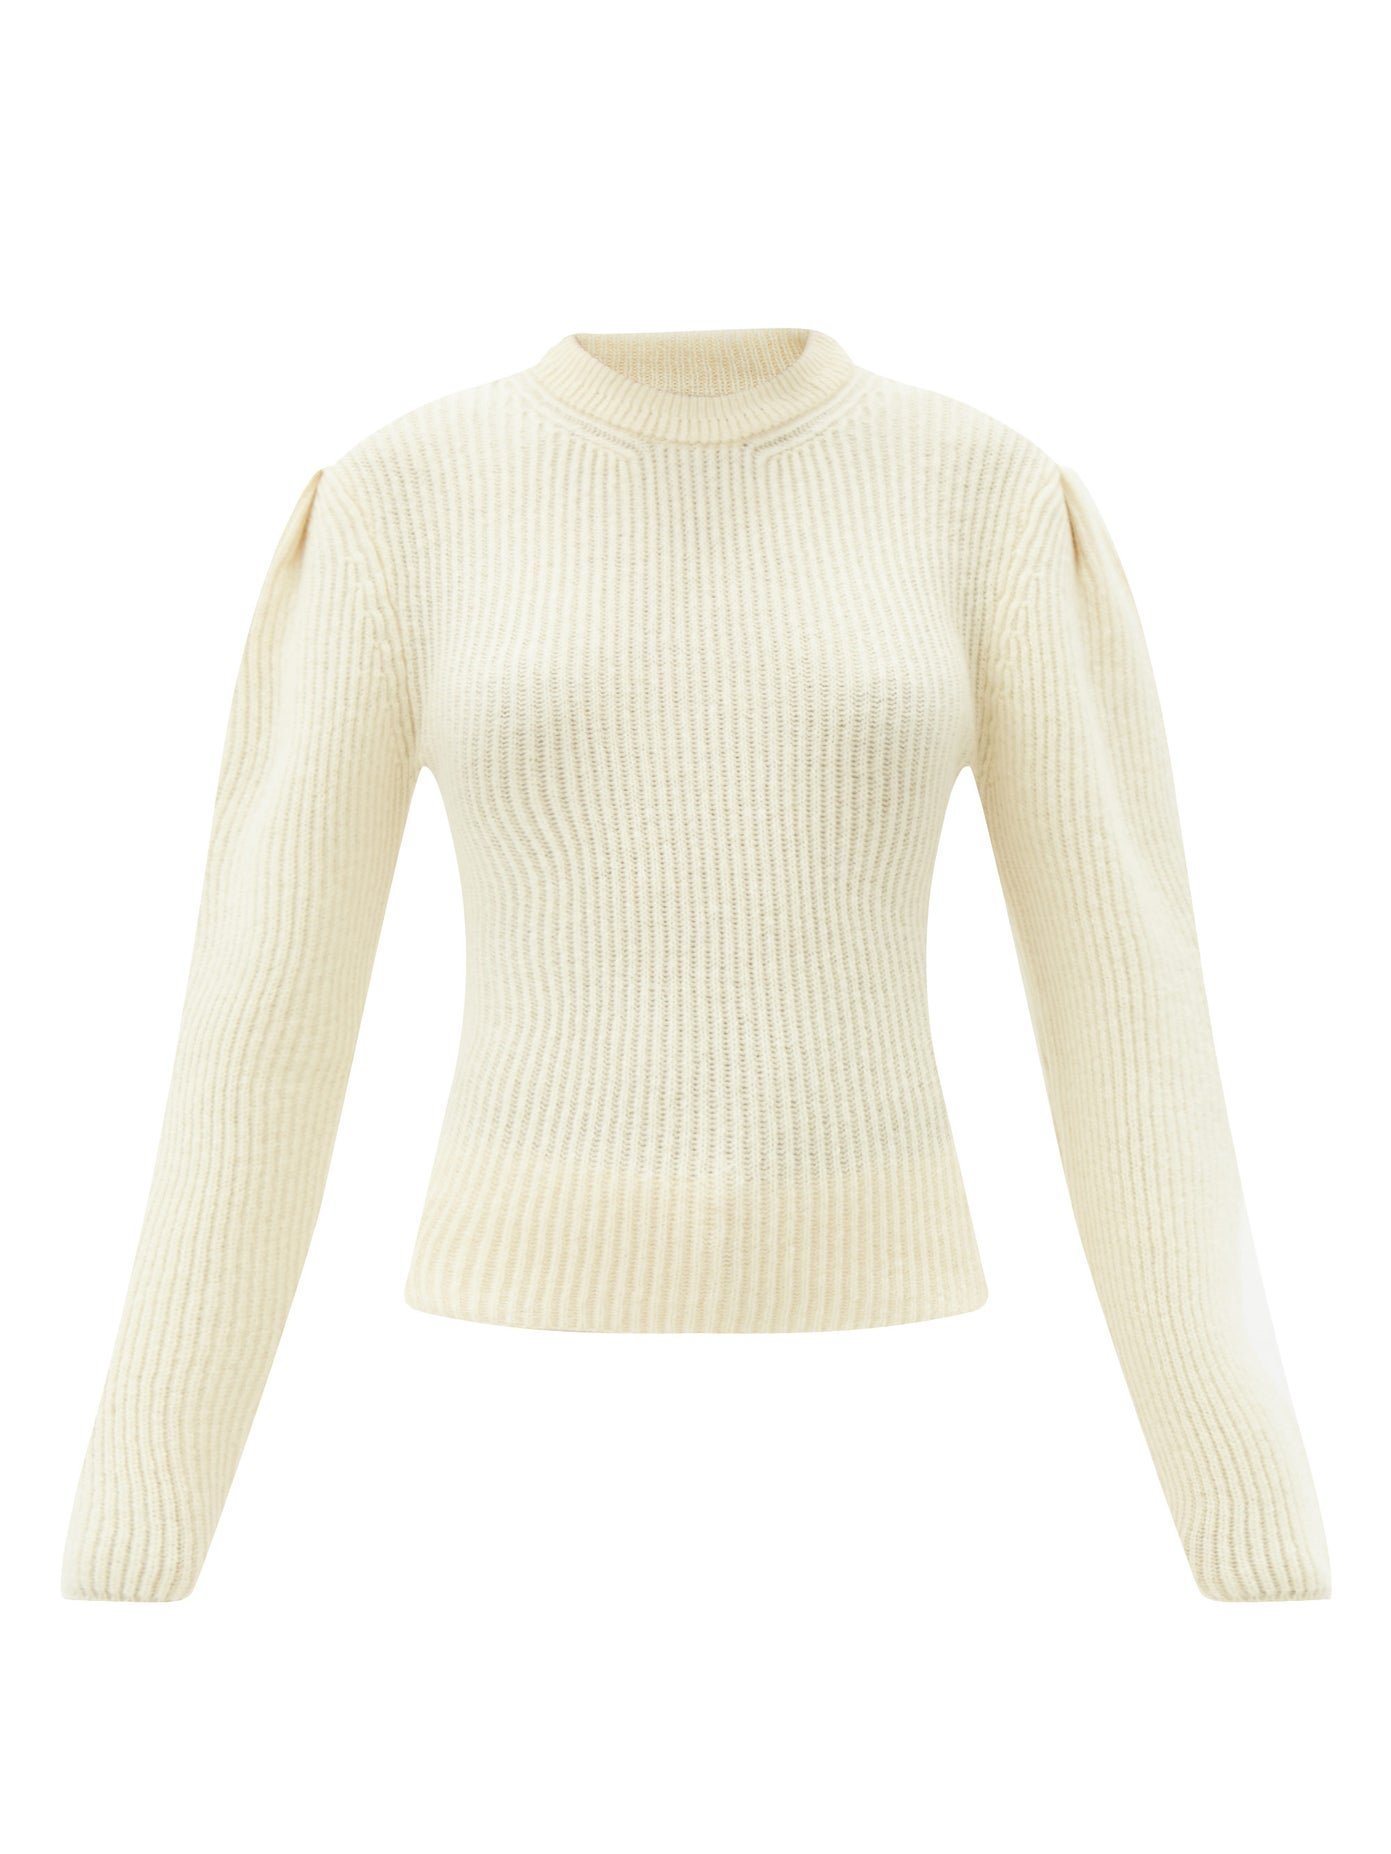 LEMAIRE Balloon-Sleeve Ribbed Wool Sweater in Ivory | Endource